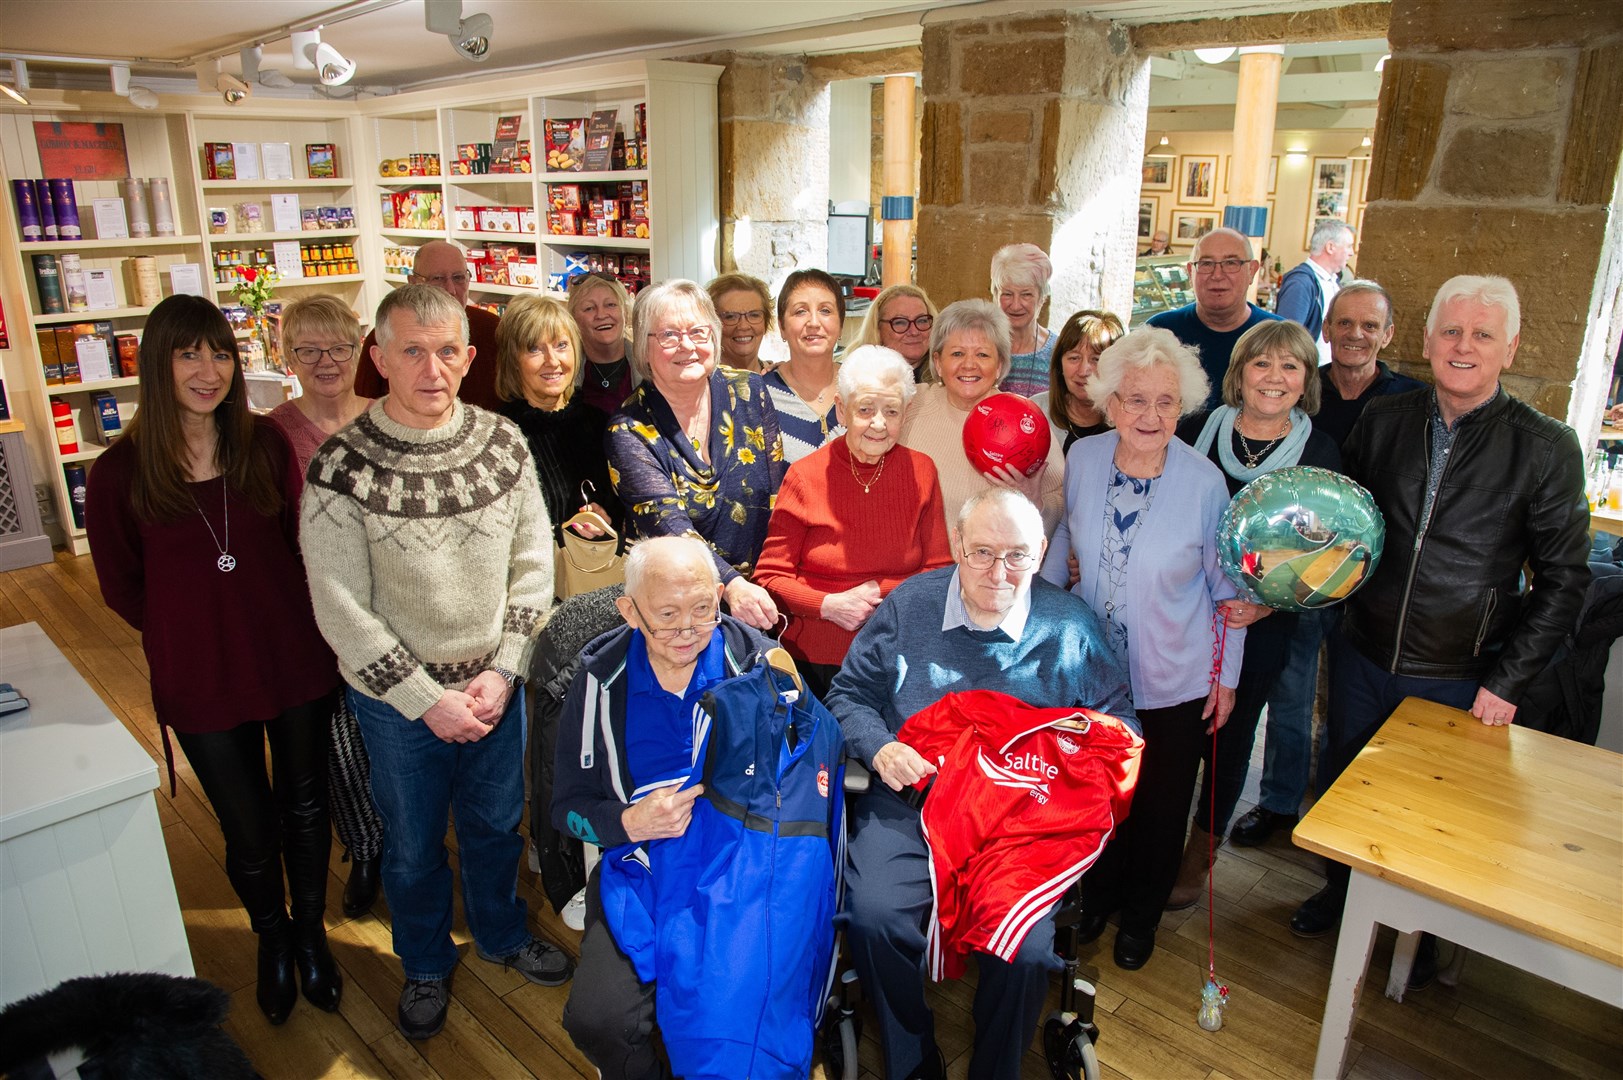 Well-known Elgin face Jimmy McLean finishes his 70th birthday weekend celebrations with lunch at Johnstons of Elgin, where he is presented with a range of gifts from Aberdeen Football Club. Picture: Daniel Forsyth.